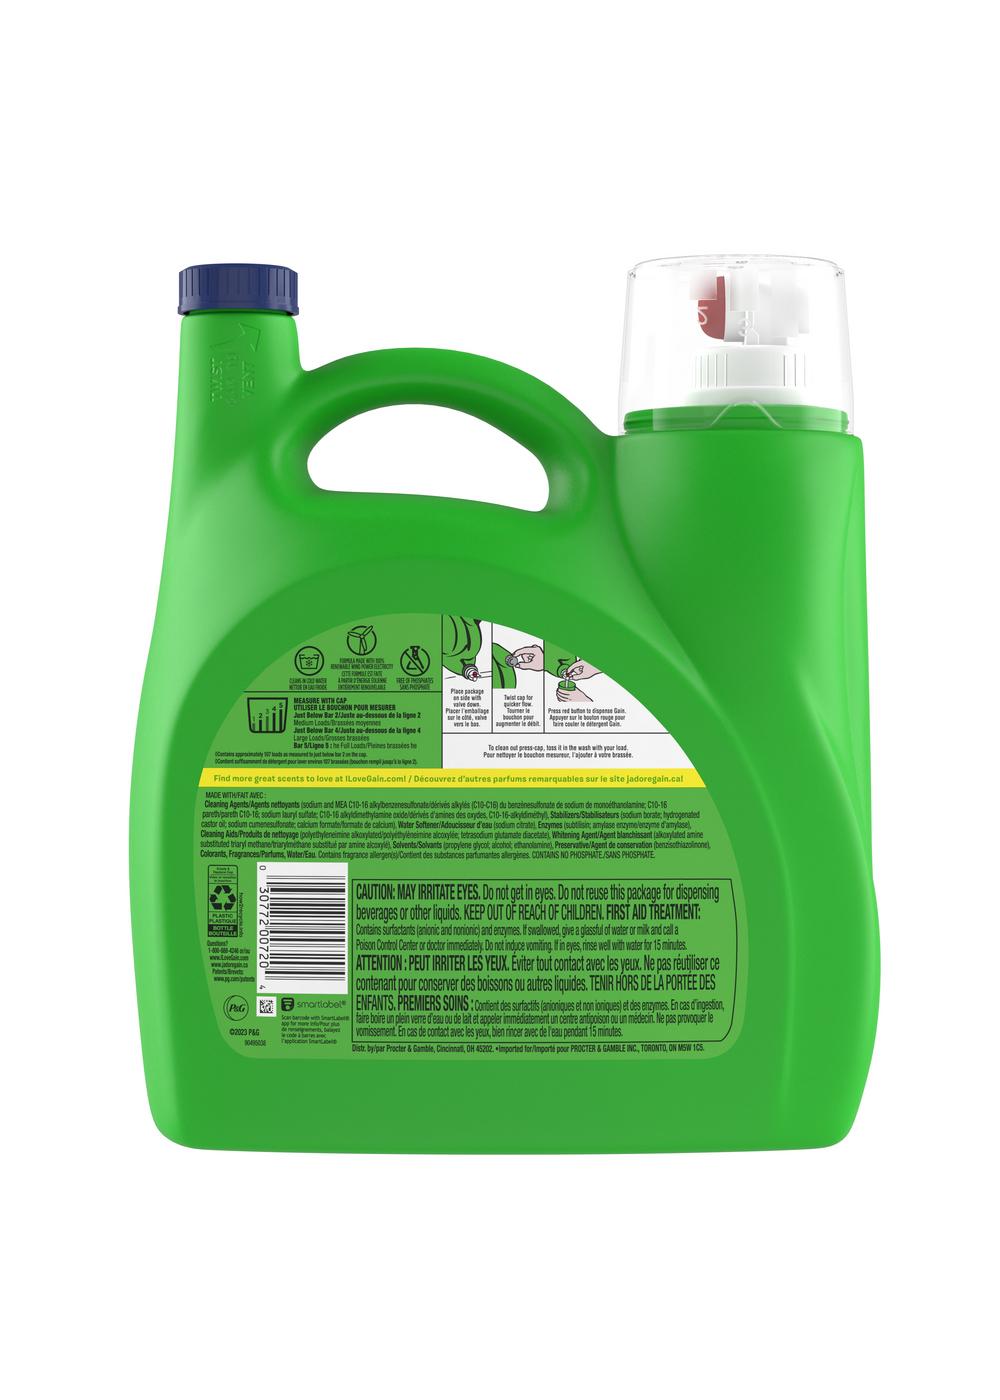 Gain + Aroma Boost HE Liquid Laundry Detergent, 107 Loads - Spring Daydream; image 5 of 6